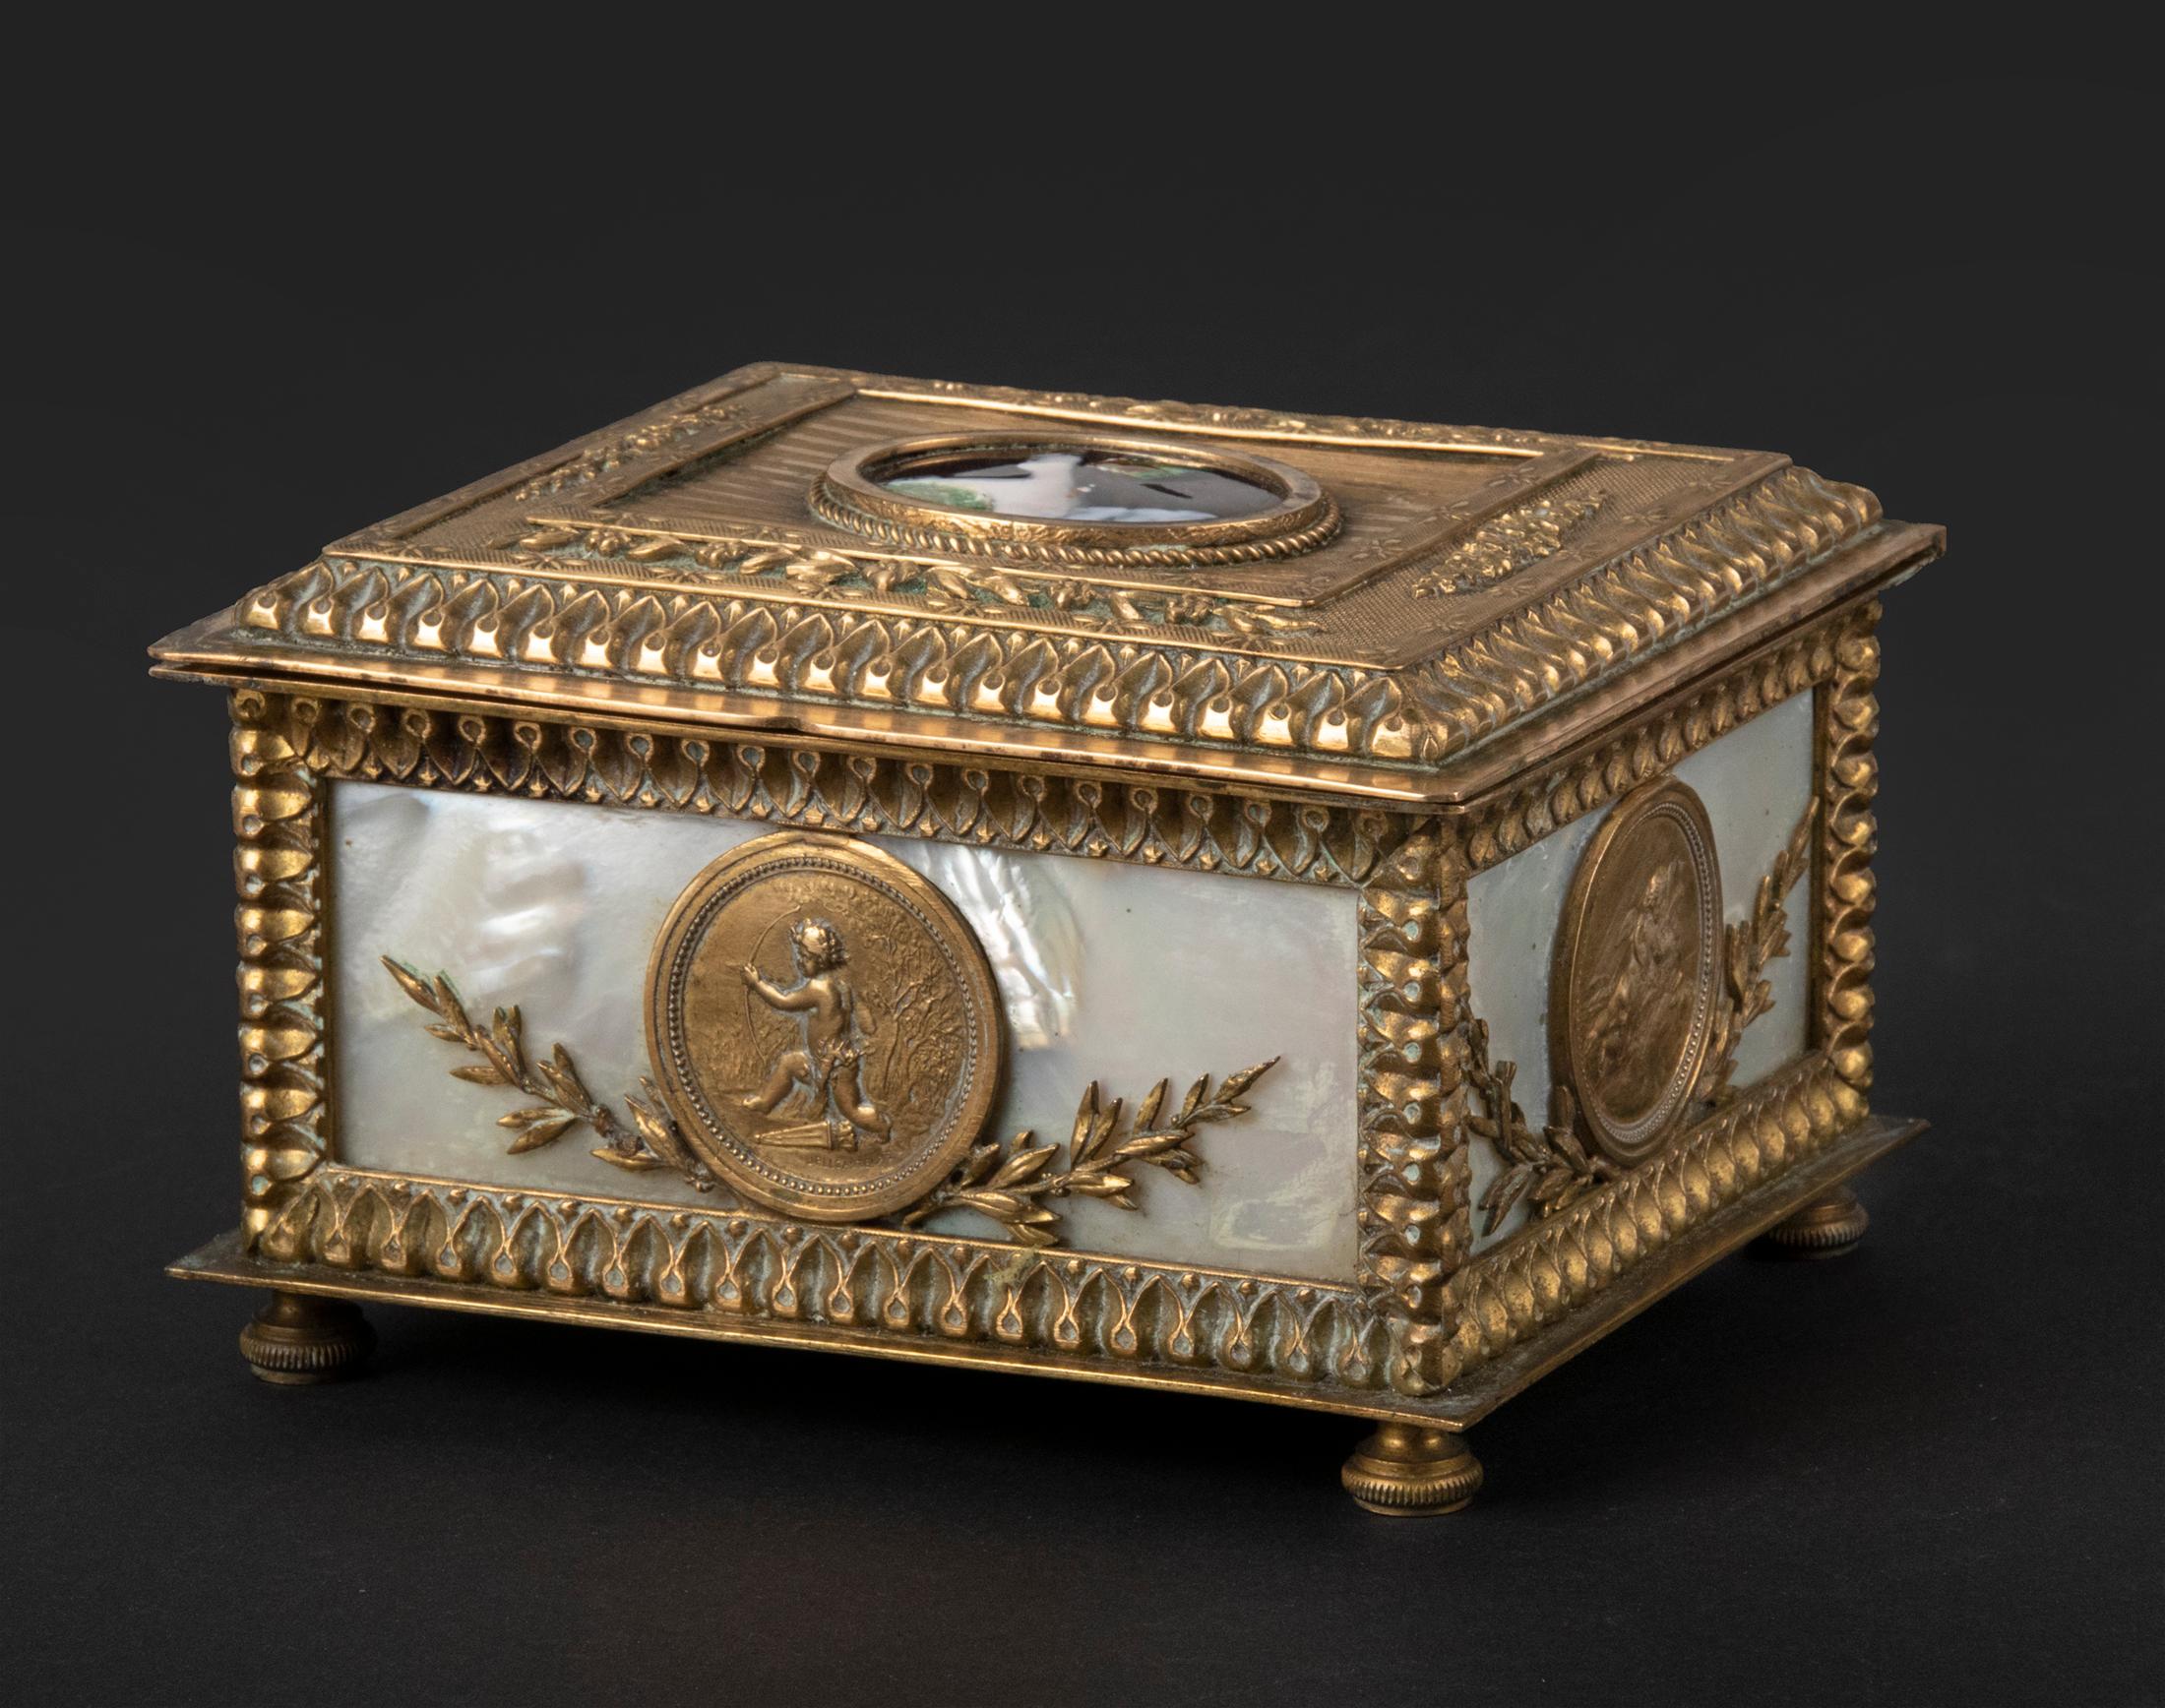 Beautiful antique jewelry box from France, dating from around 1880. The box is made of bronze, it has fine etching work and is inlaid with mother of pearl. In the middle of the lid is a beautiful miniature portrait of a young woman, this is an